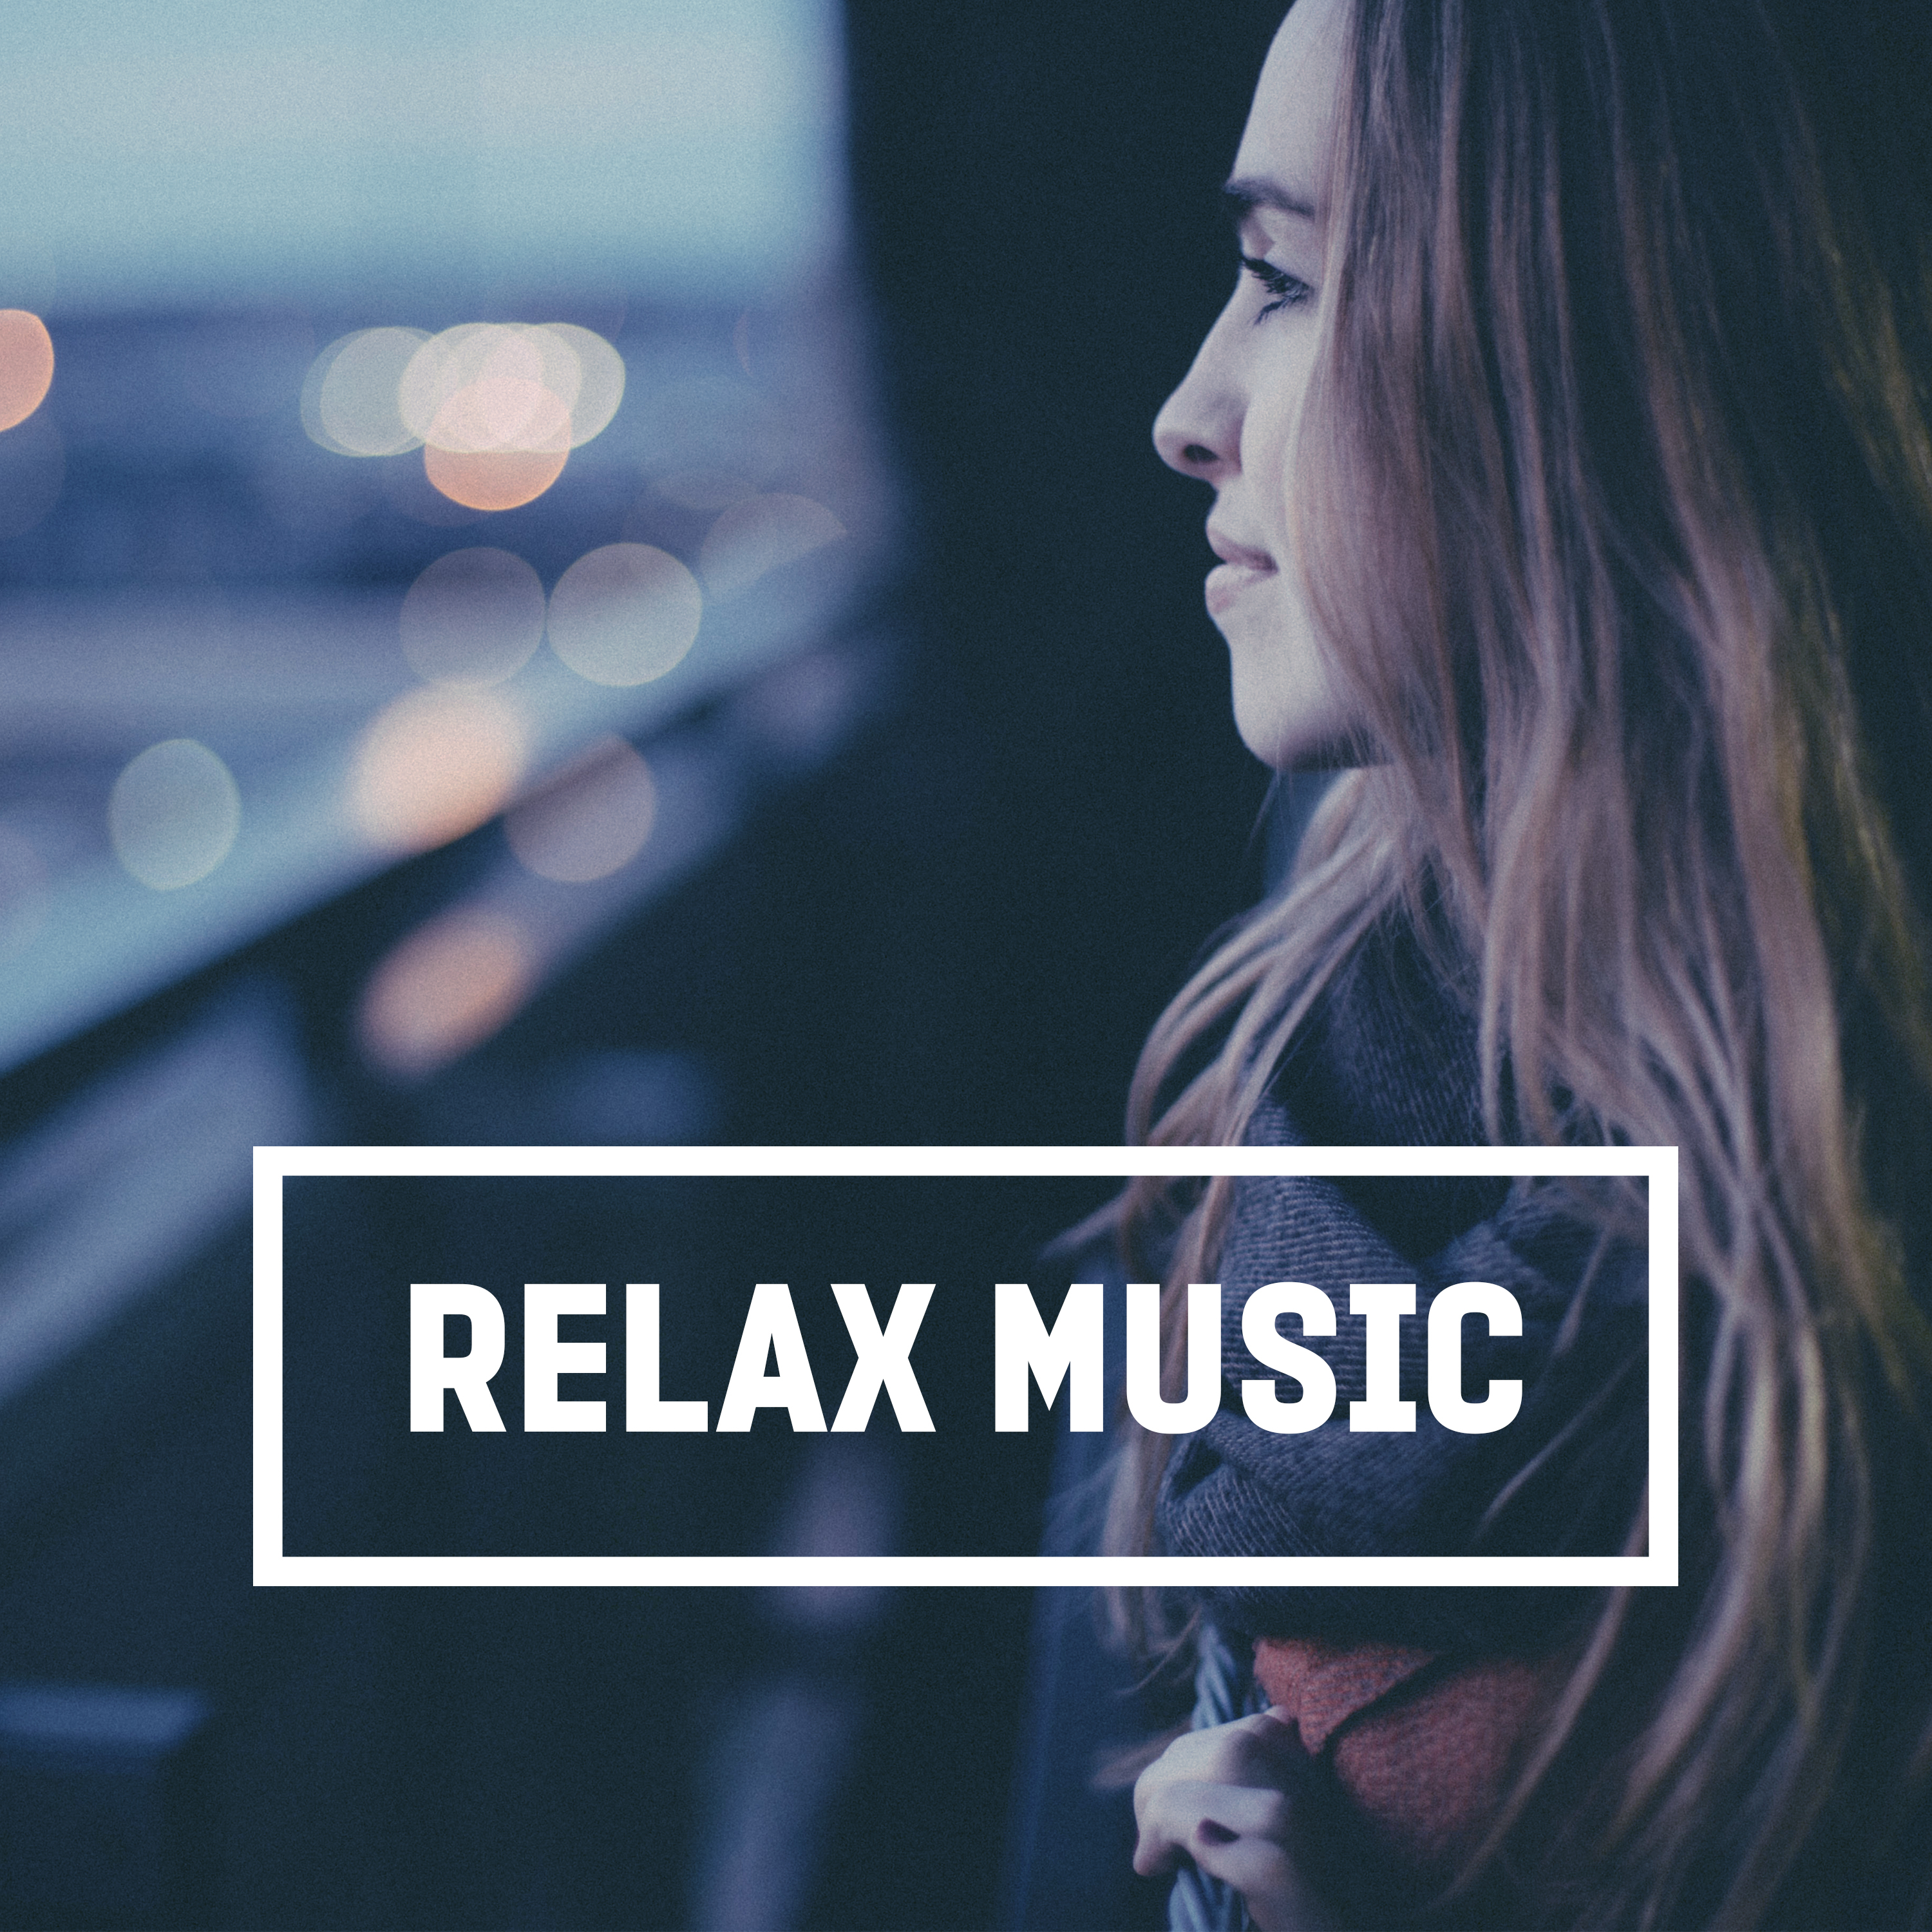 Relax Music  Relieve Stress, New Age Music, Meditate, Yoga, Sleep, Spa, Massage, Rest